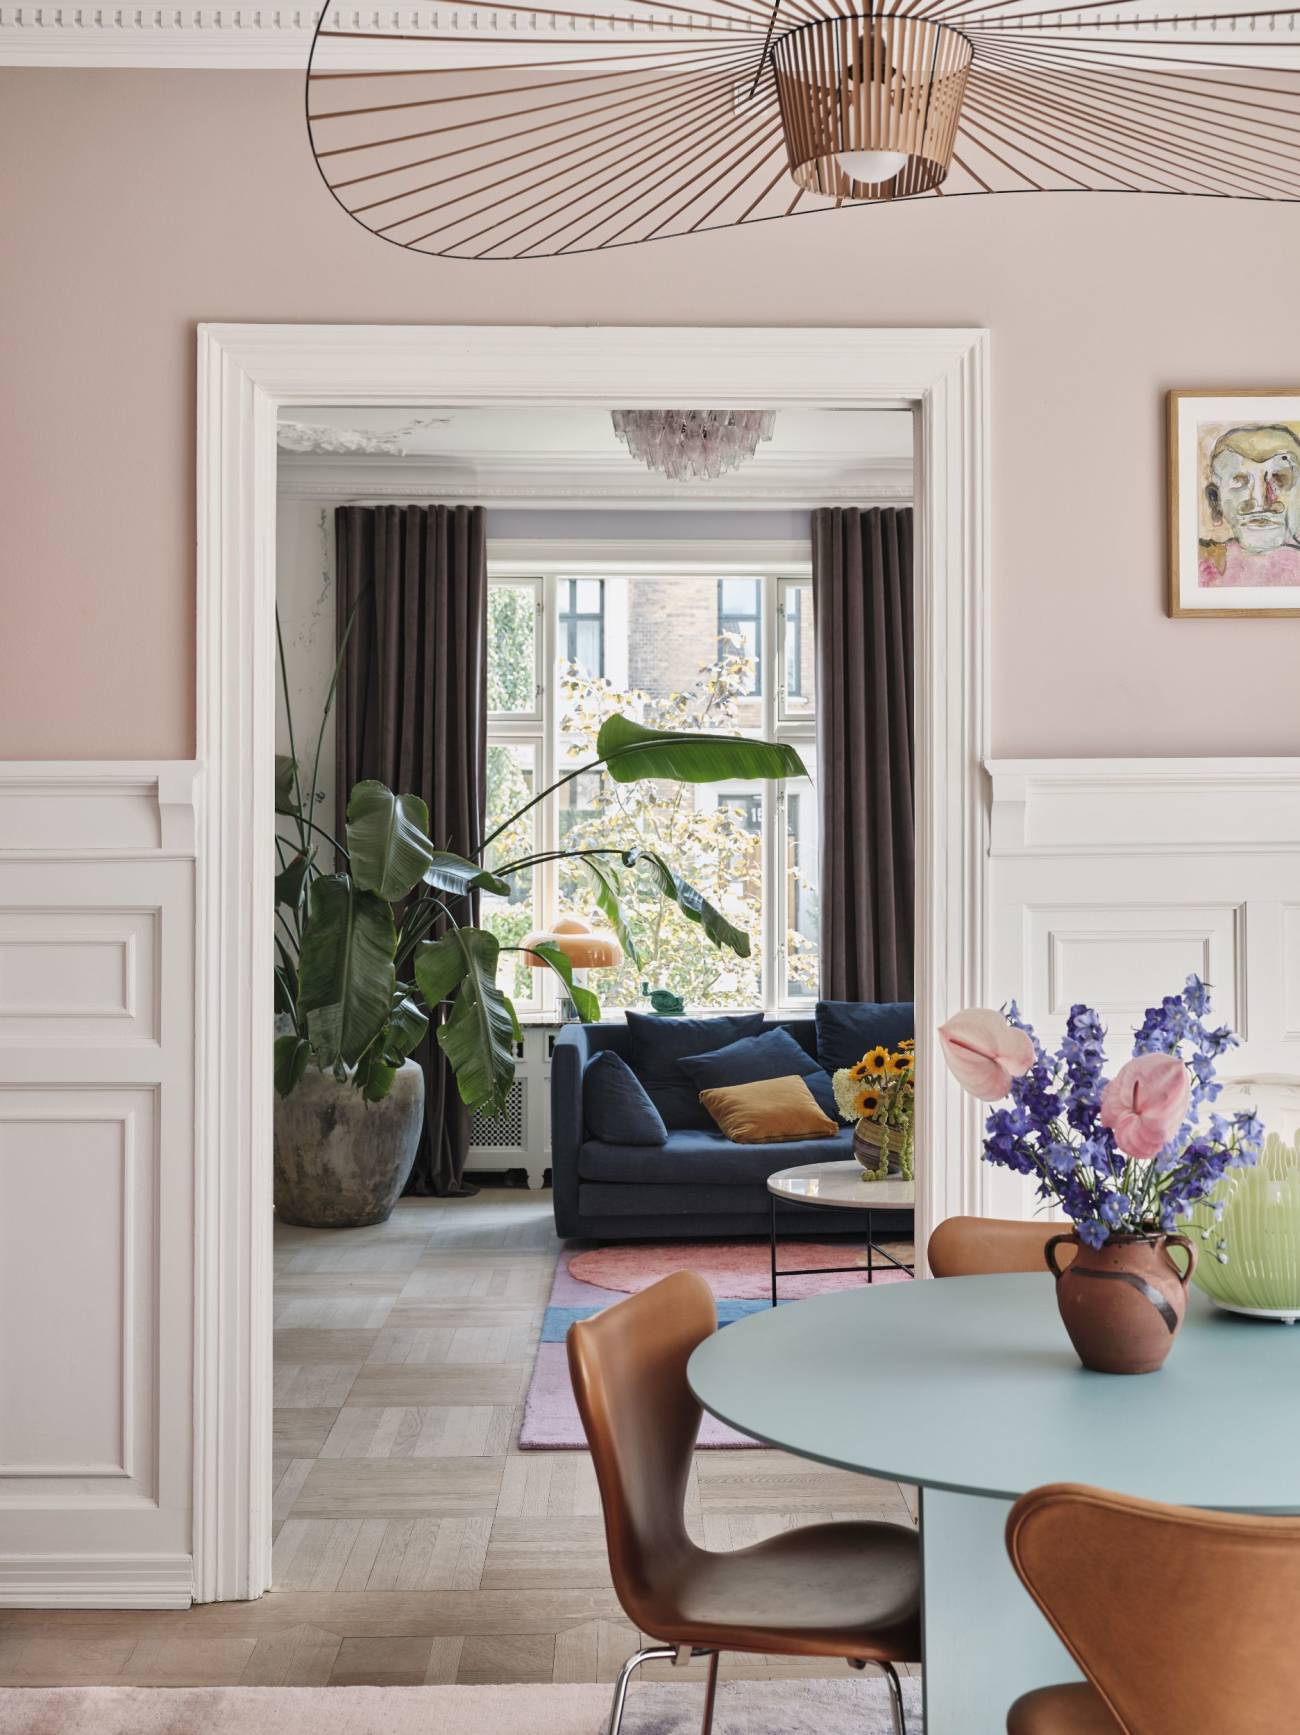 This Colorful Copenhagen Home Will Inspire You To Make Bolder Decorating Choices